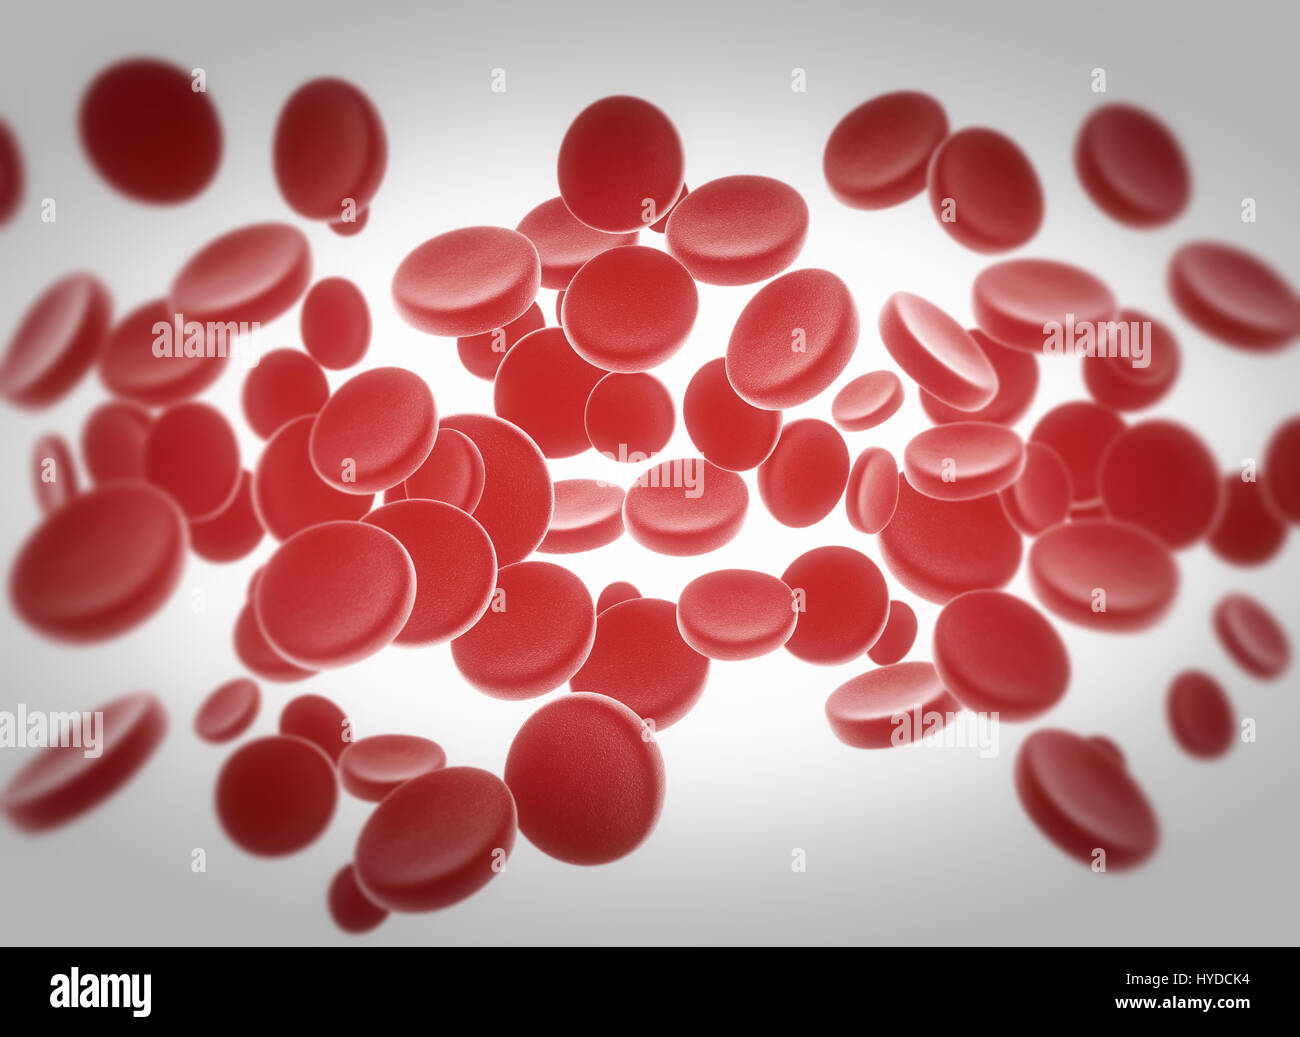 Red blood cells flowing Stock Photo